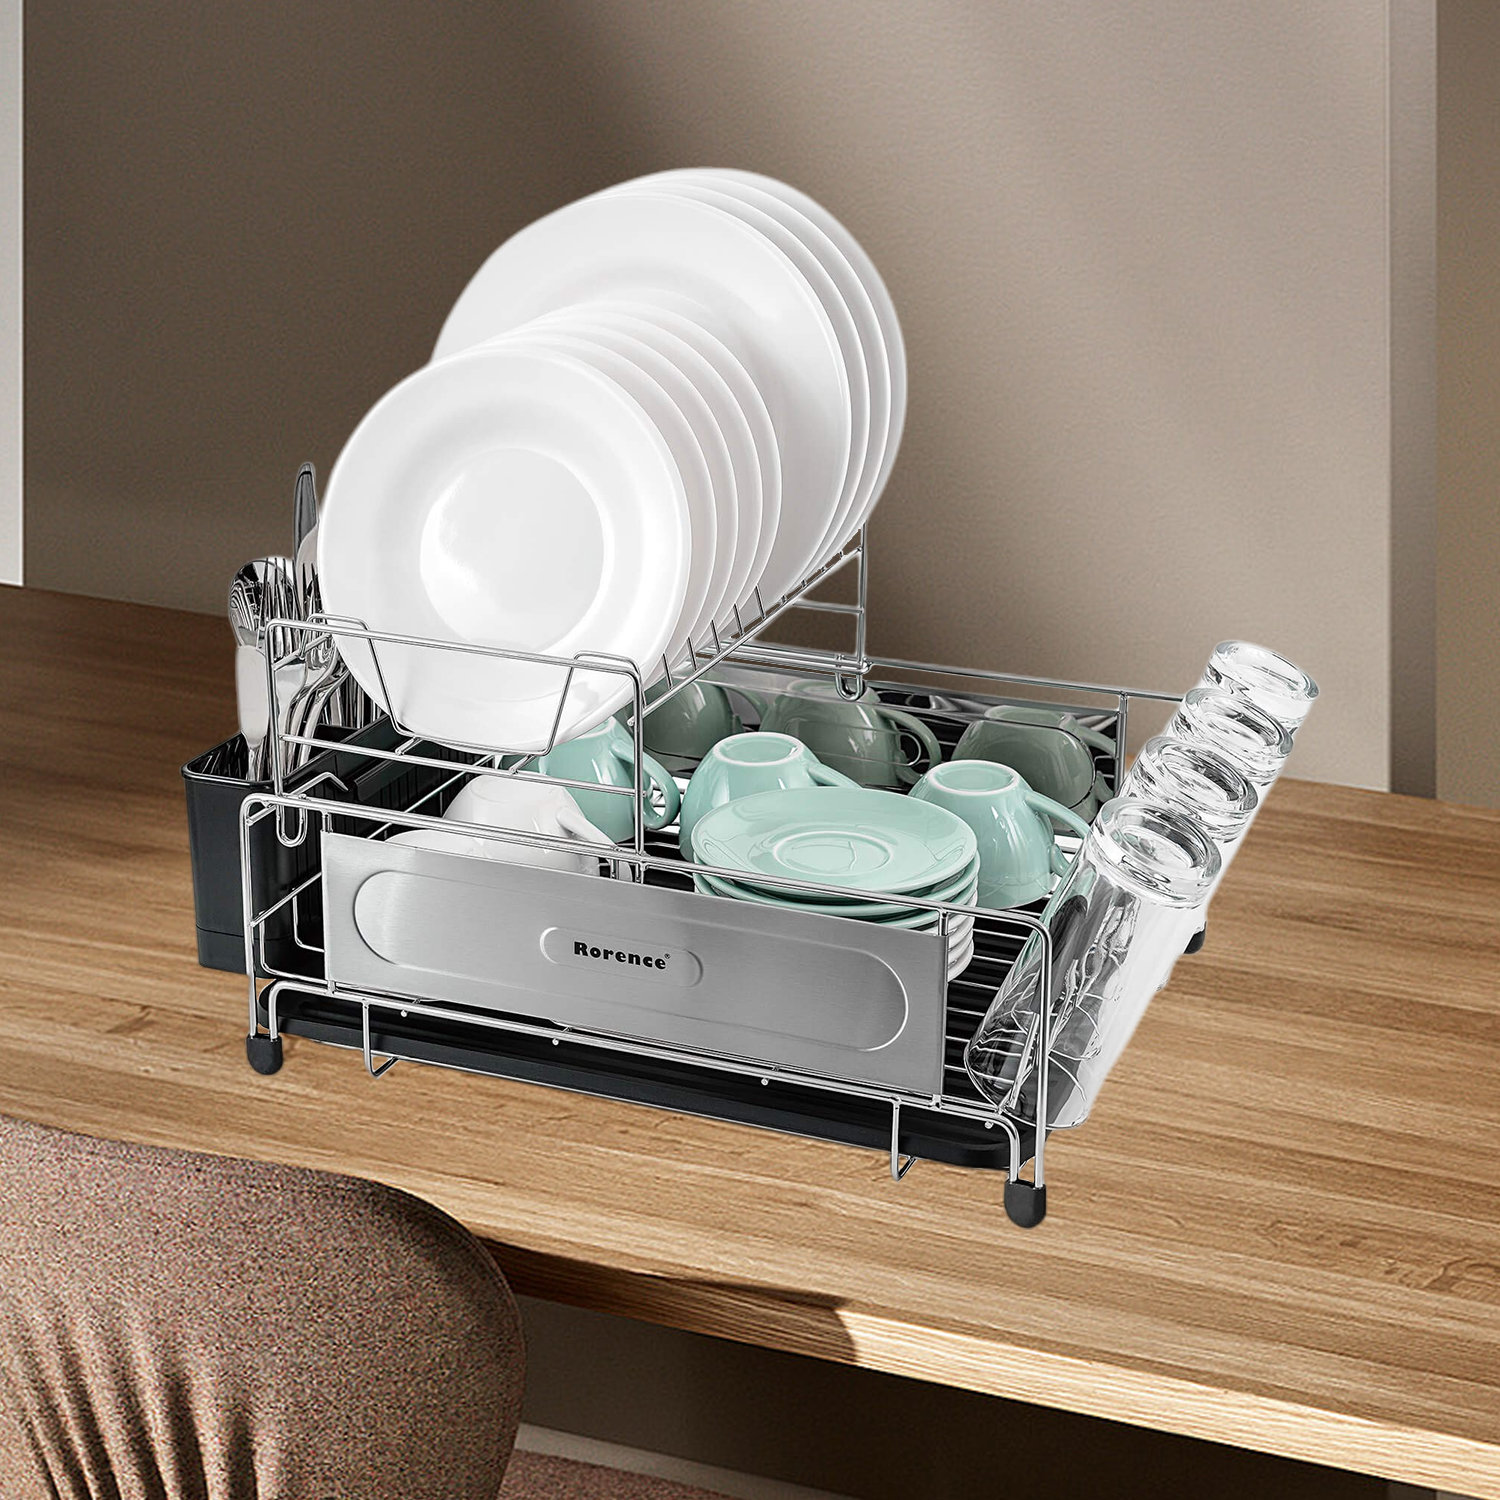 qxttech Stainless Steel Dish Rack & Reviews